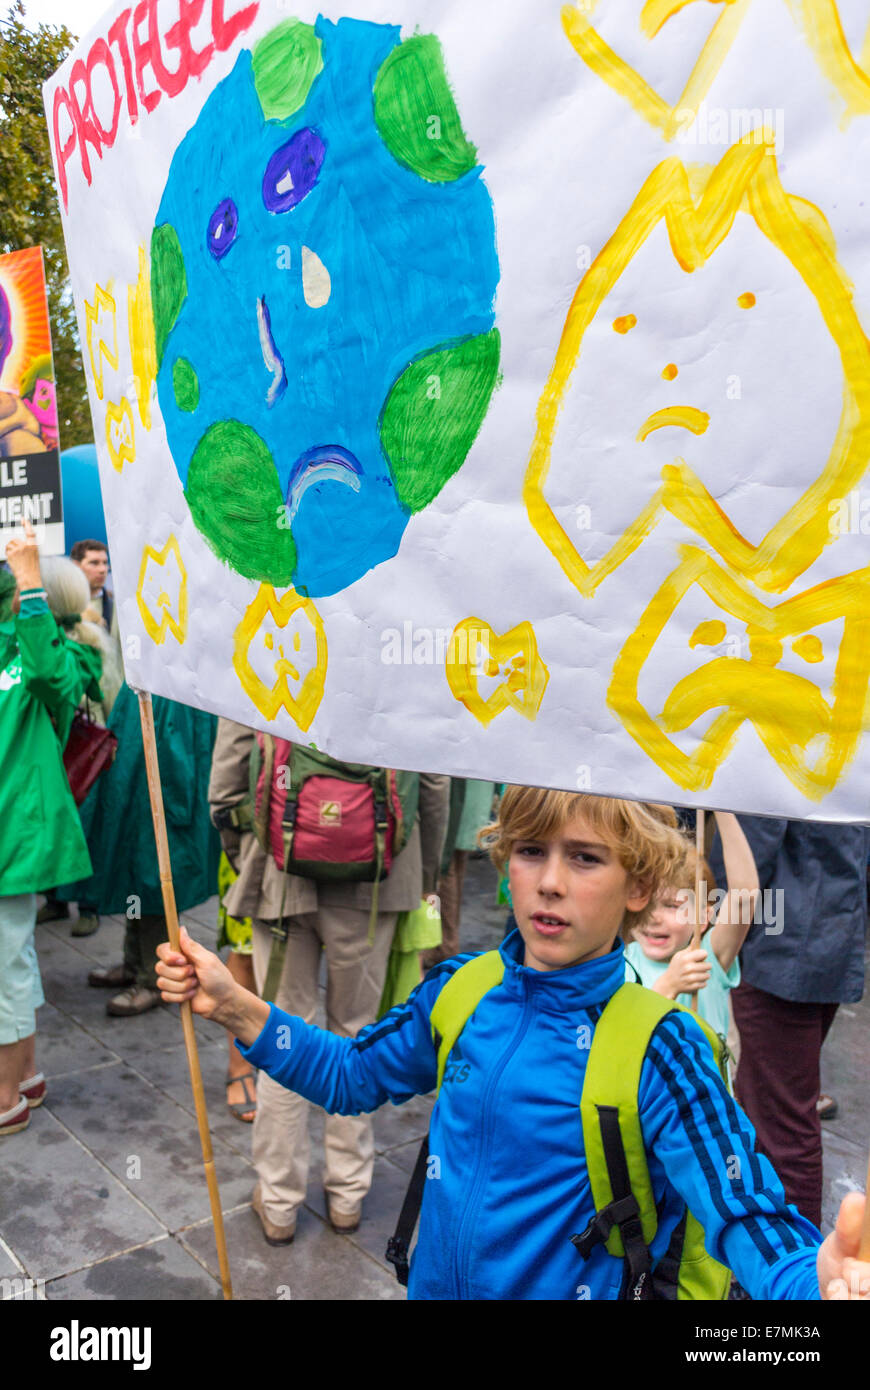 Paris, France, Public Energy Demonstration, International UN Climate Change March, Young Boy Holding Hand Made French climate protest sign, poster, protesters banners, children Stock Photo